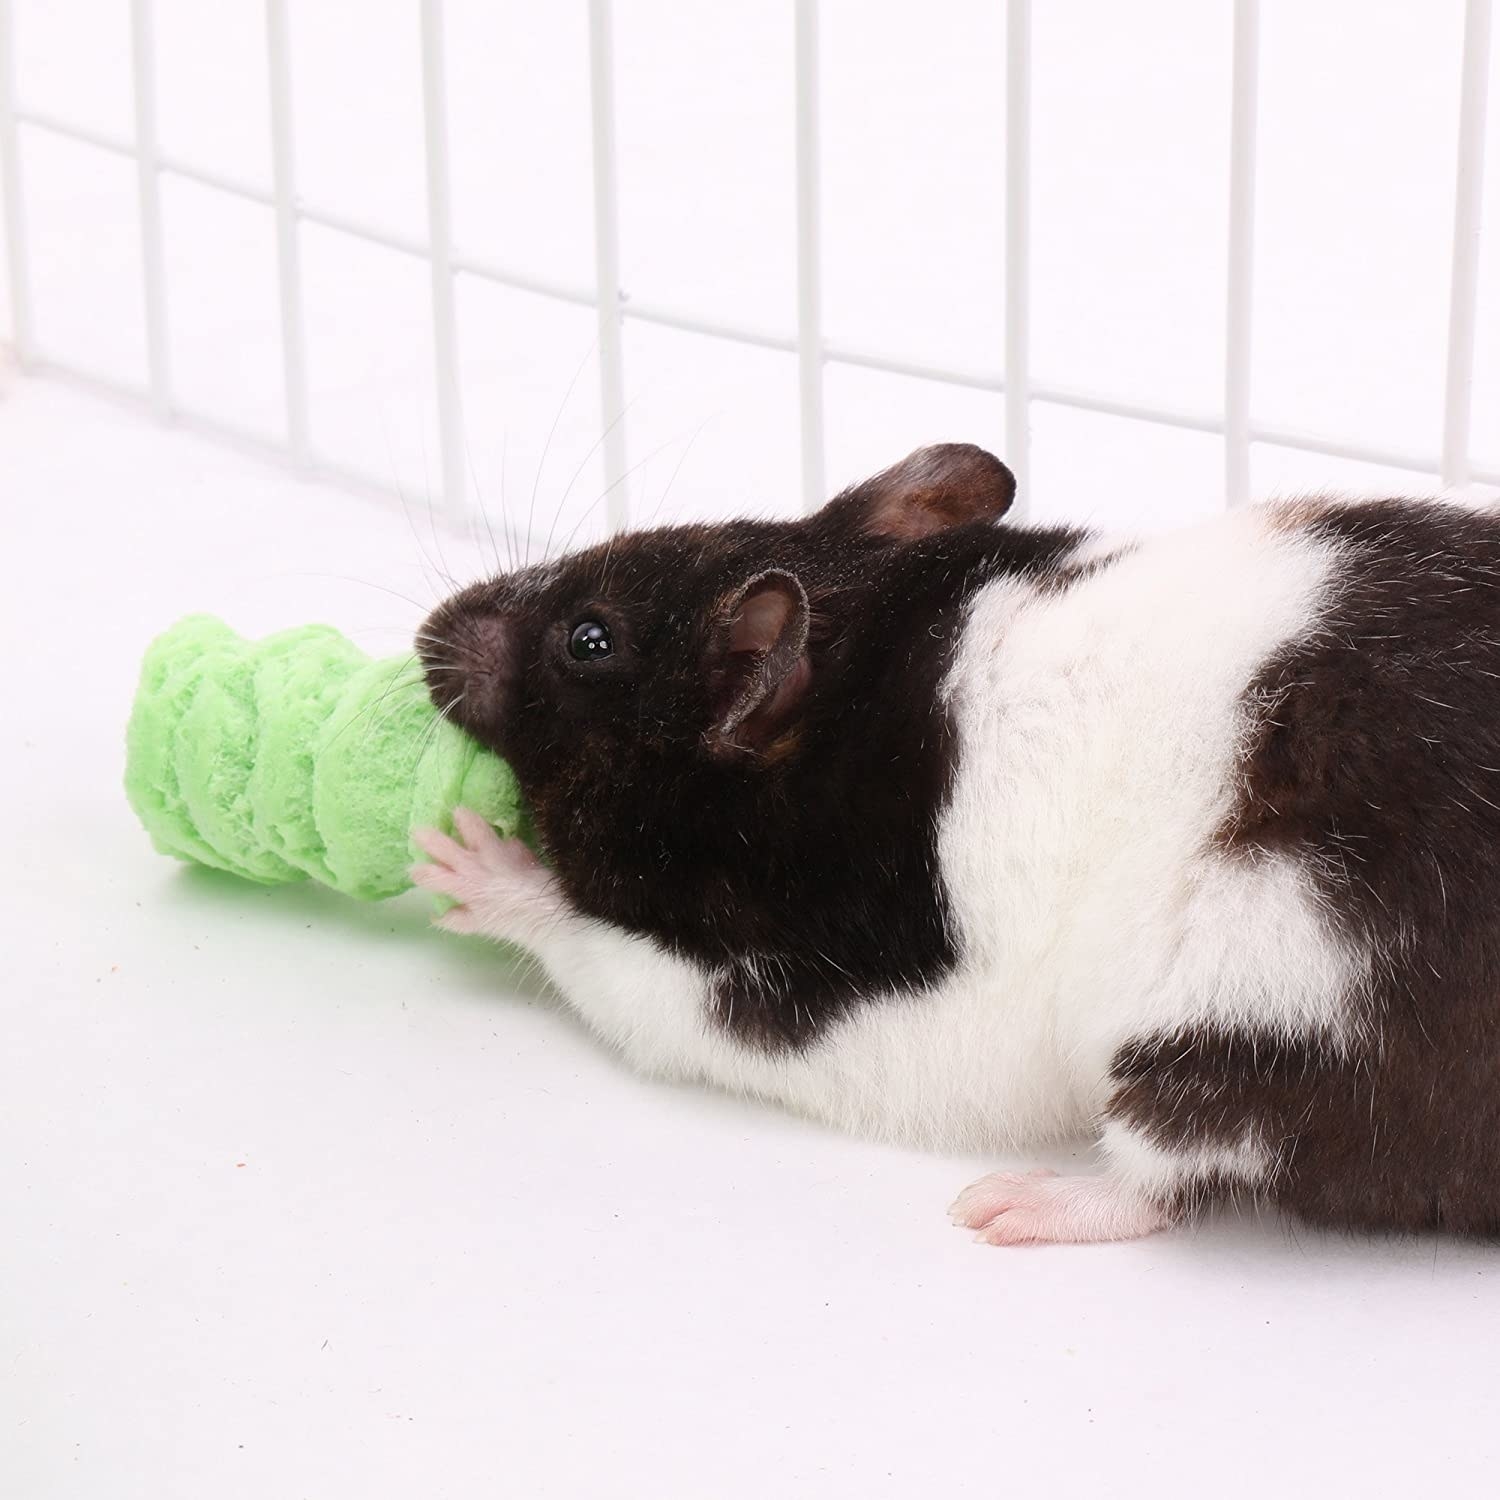 Black and white rat eating a green puff that looks like a styrofoam packing peanut